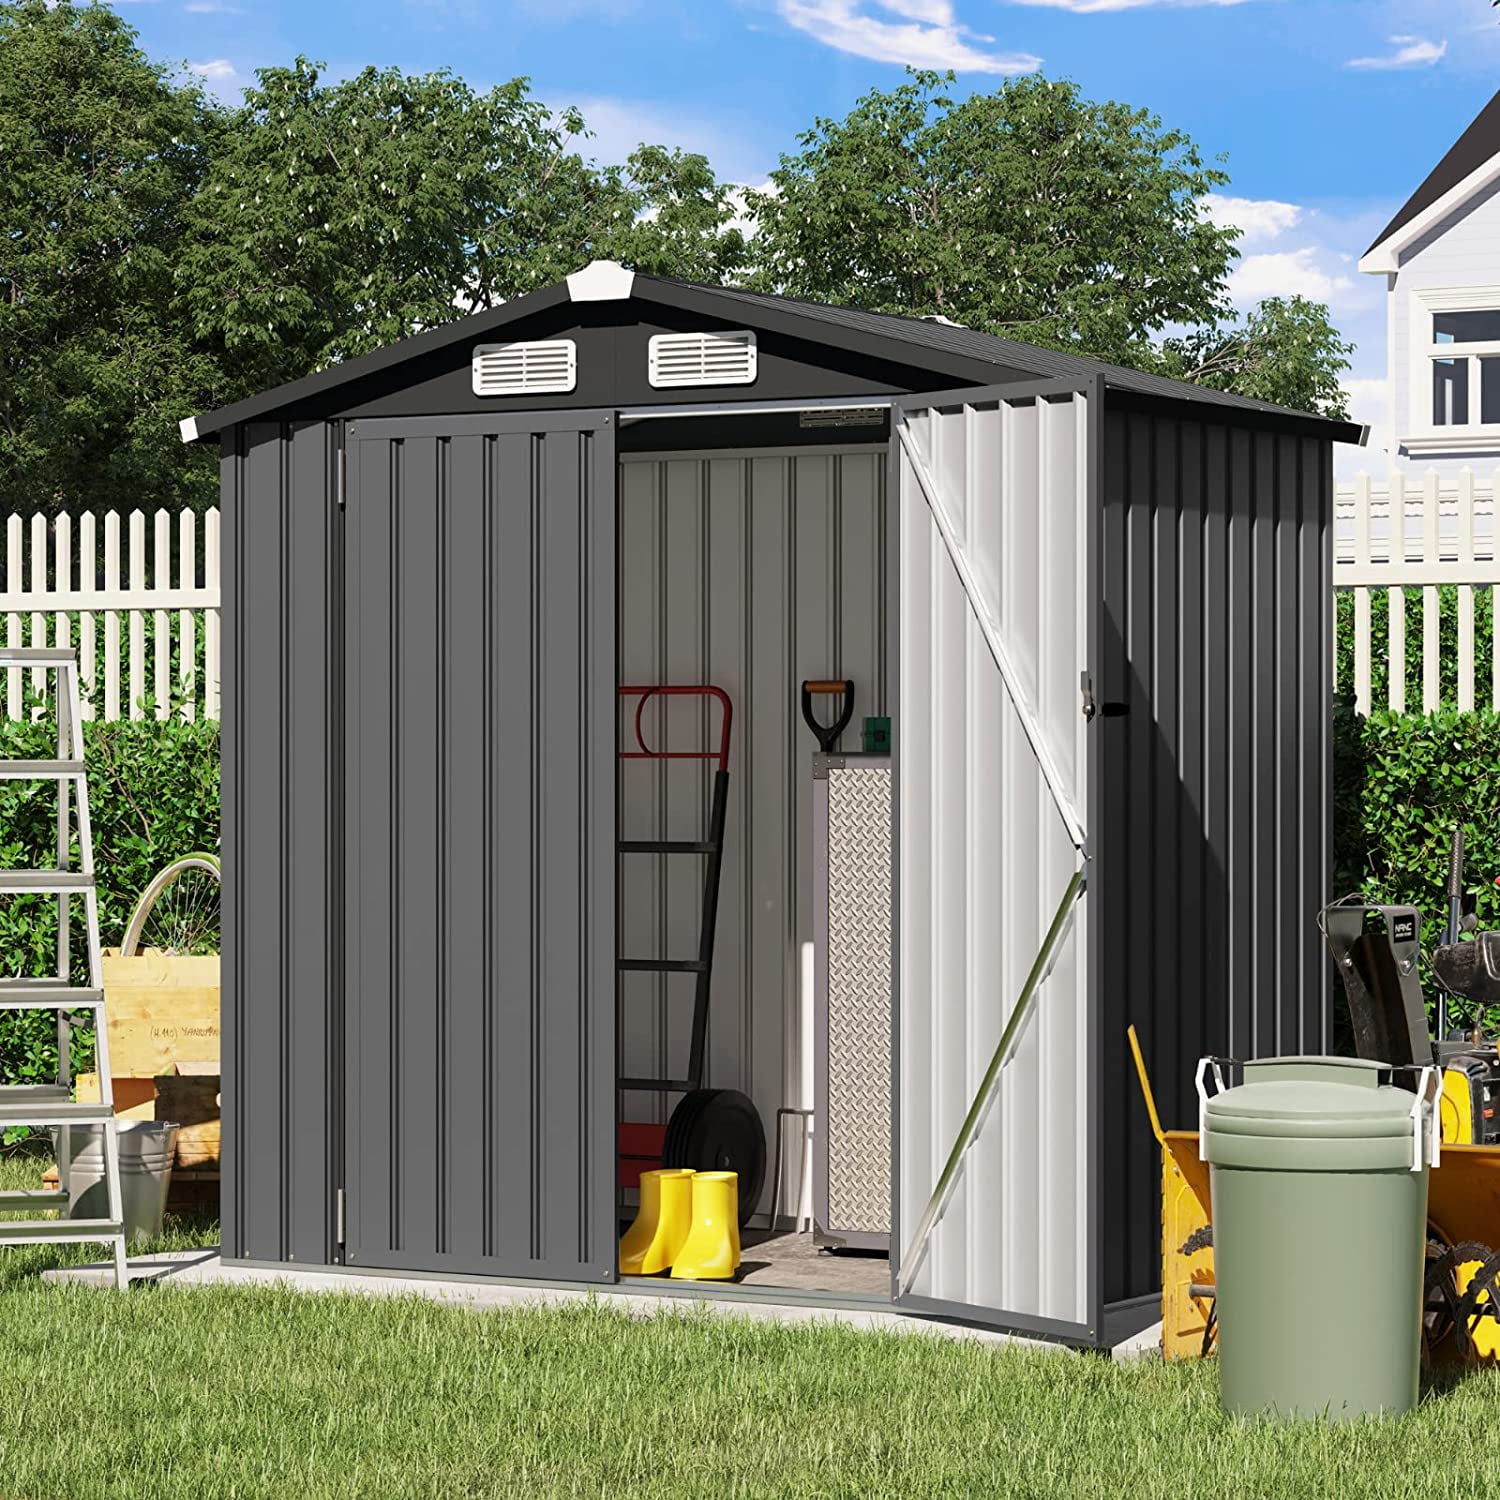 Vongrasig 5 x 3 x 6 FT Outdoor Storage Shed Clearance with Lockable Door  Metal Garden Shed Steel Anti-Corrosion Storage House Waterproof Tool Shed  for